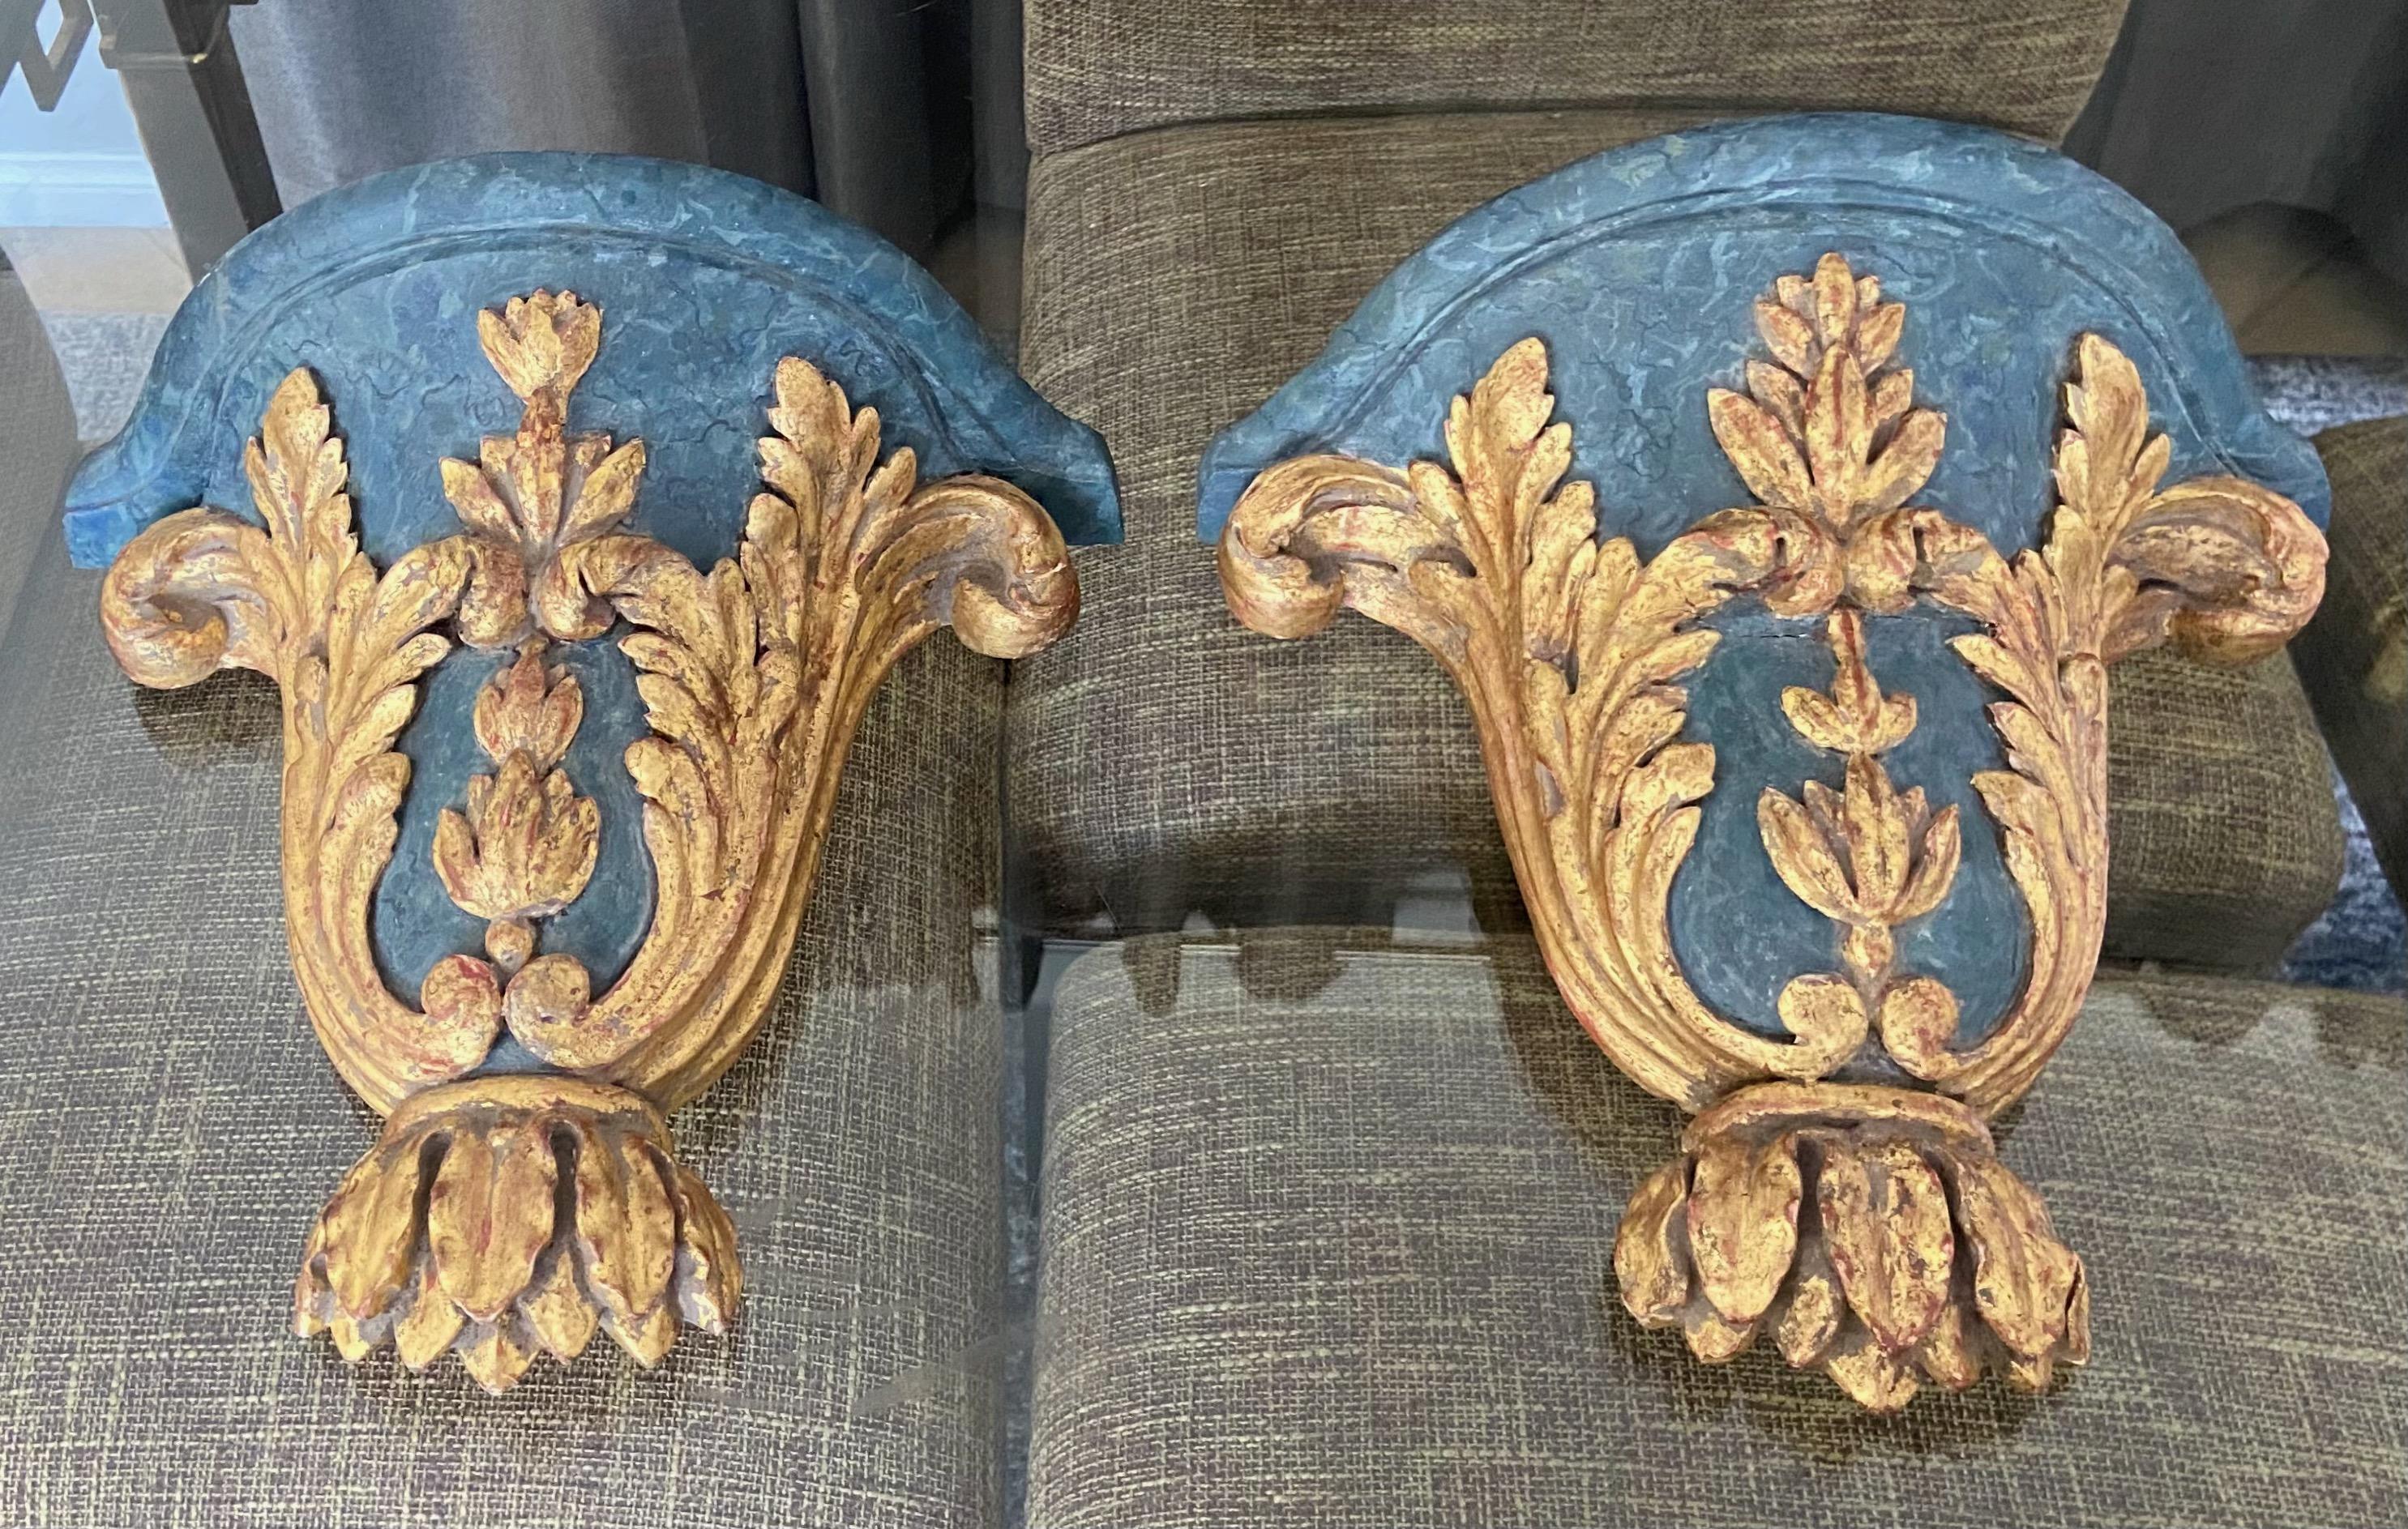 Pair of French Louis XV giltwood carved wall bracket shelves with partial blue faux marble painted finish. The brackets are expertly crafted highlighting an acanthus leaf motif.